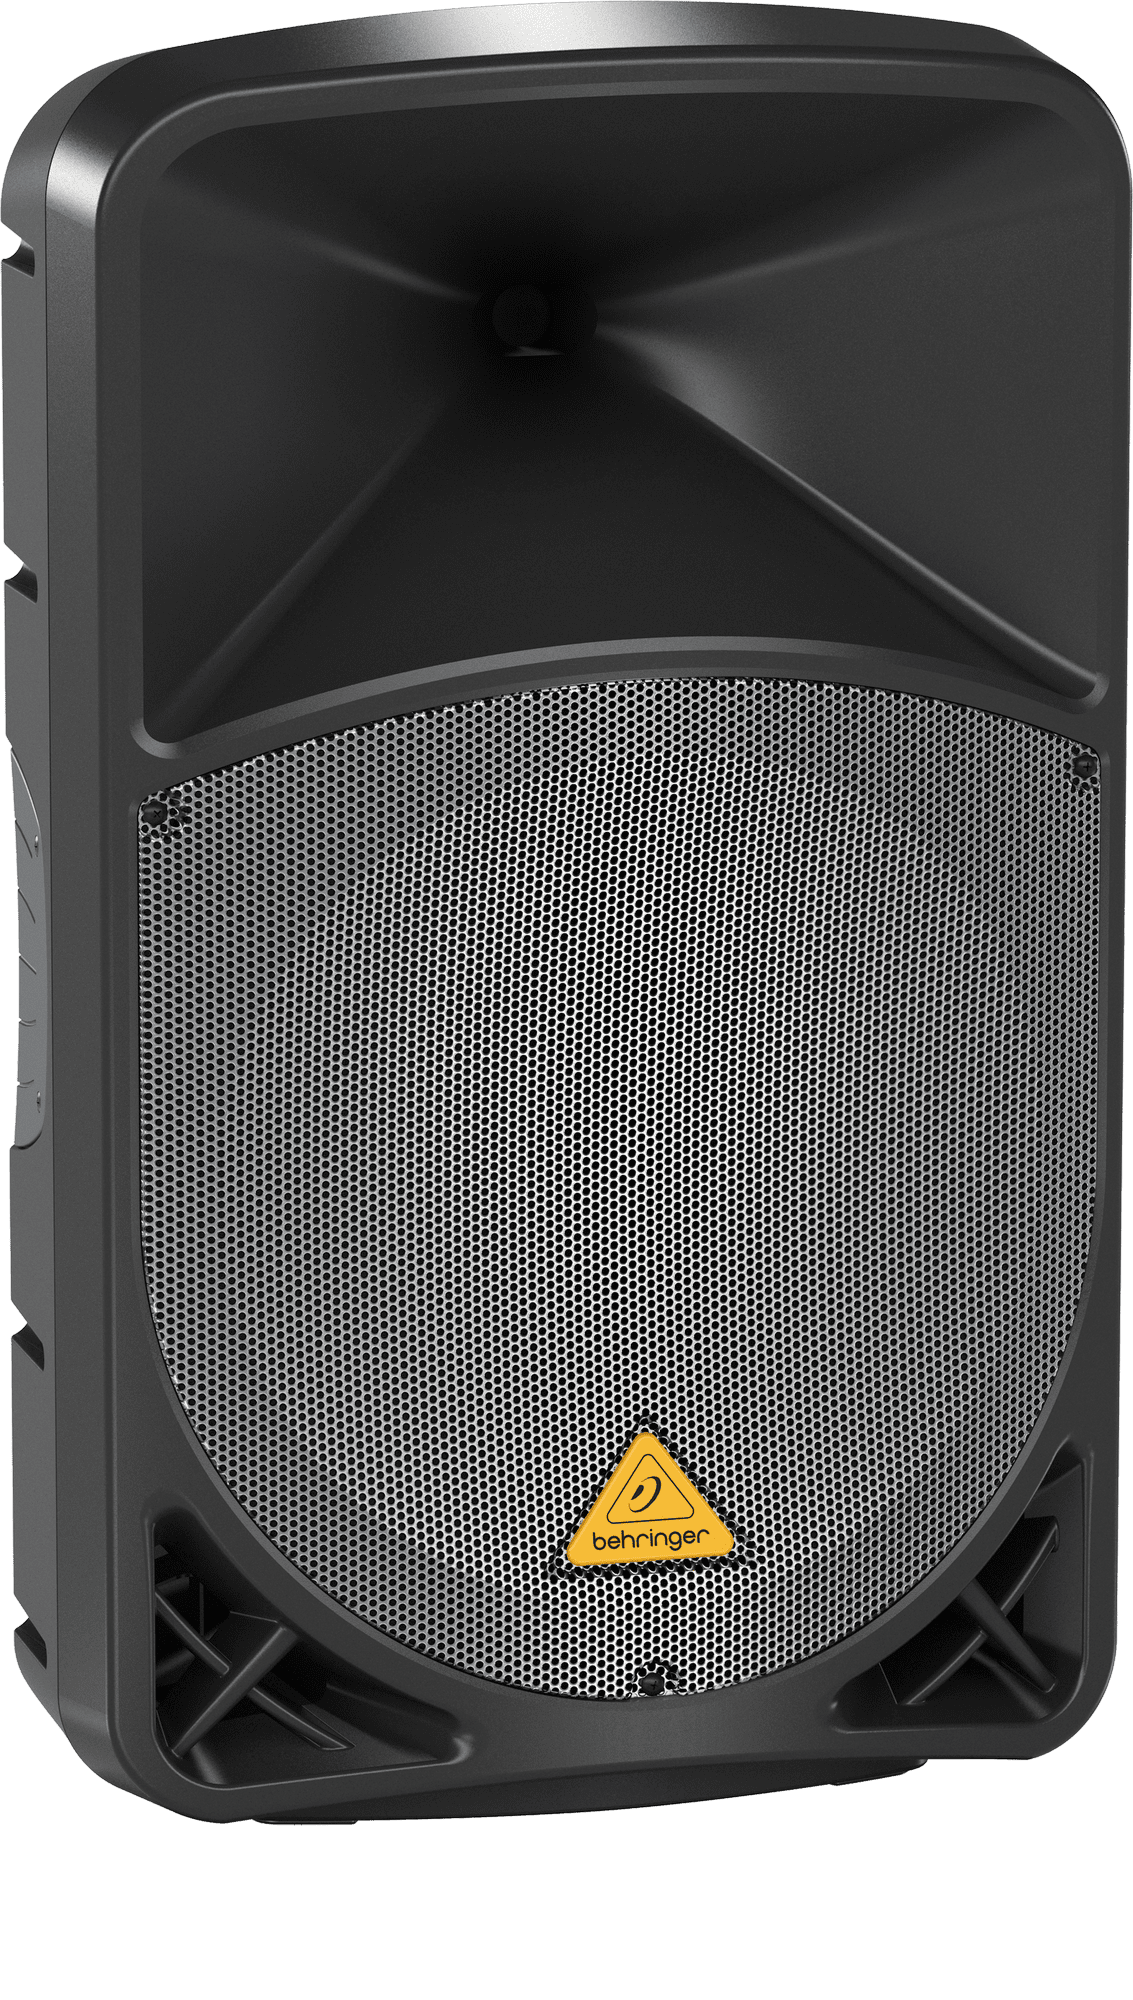 Lightweight and powerful, the Behringer Eurolive B115D active PA speaker delivers excellent, low-distortion power and state-of-the-art features.